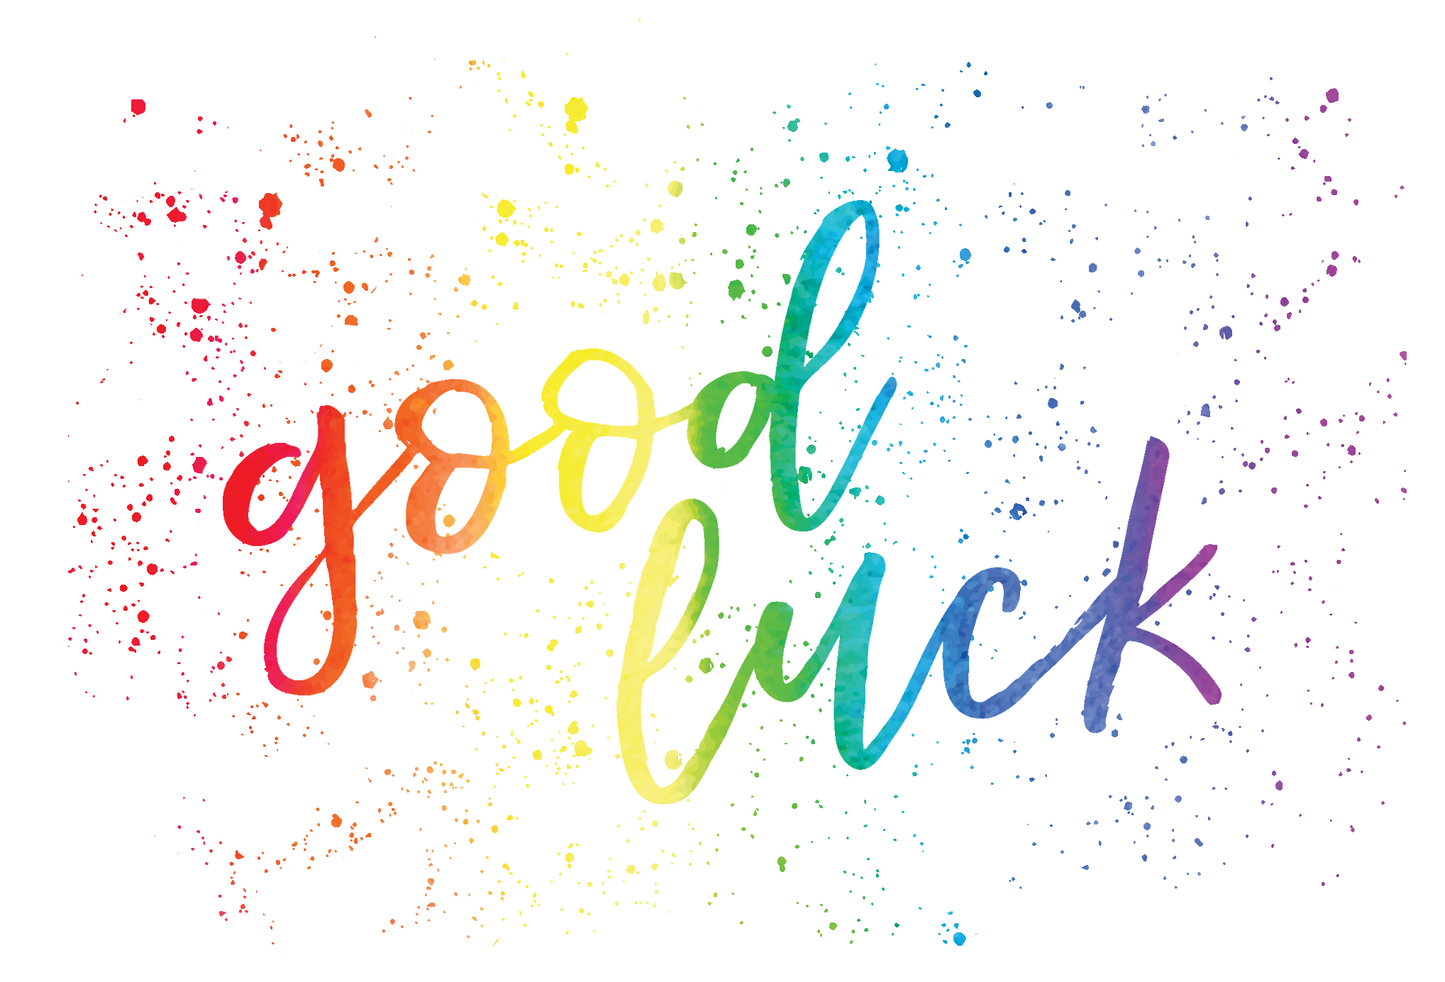 Good Luck Card Paint Splashes - Cardmore